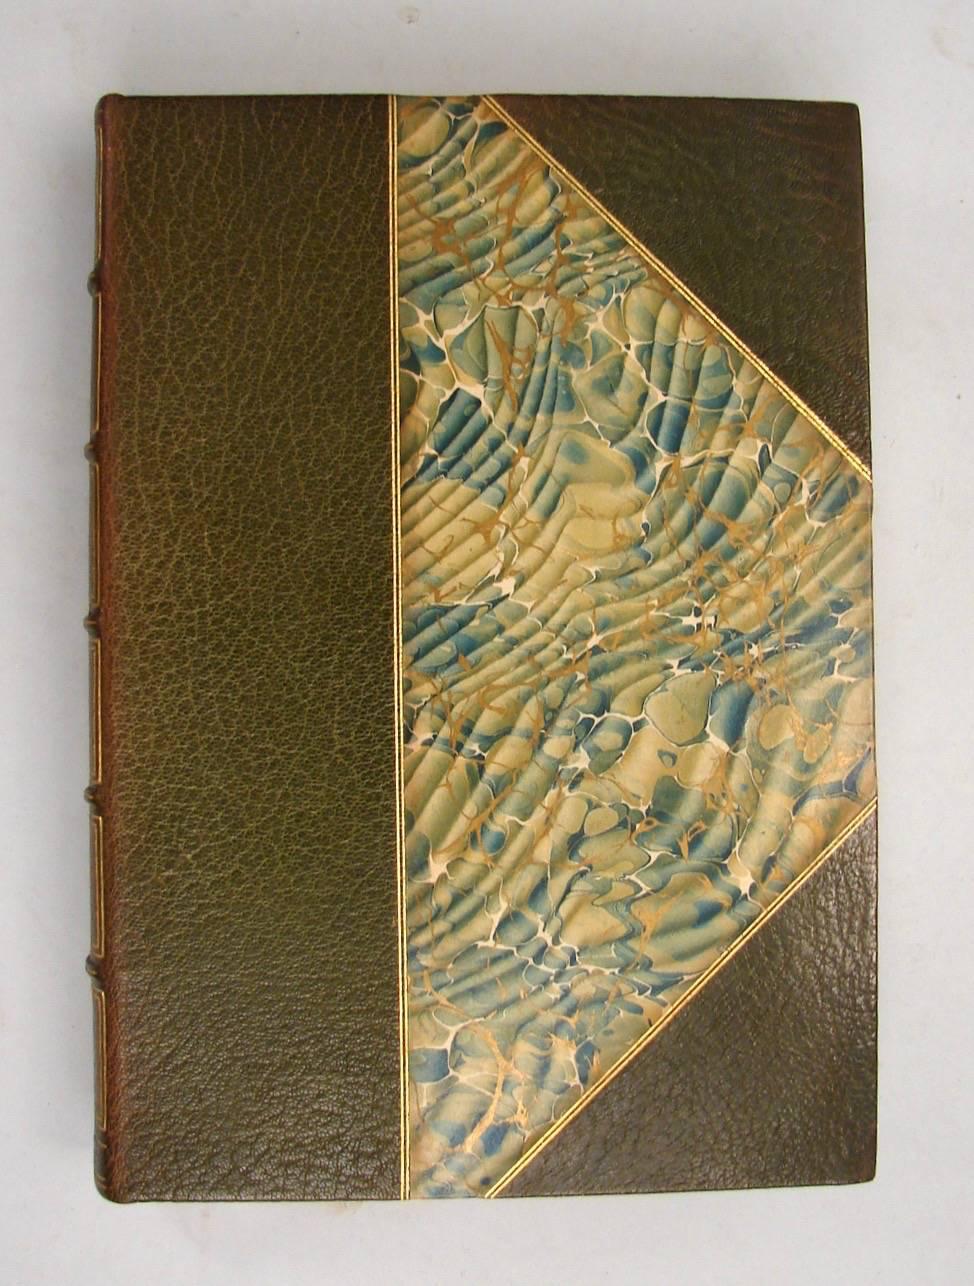 The Iliad of Homer translated by William Cullen Bryant, bound in 3/4 olive green levant morocco, gilt paneled backs, large paper edition limited to 600 copies of which this is number 158. Published Boston, Houghton Mifflin 1905. Very fine condition.